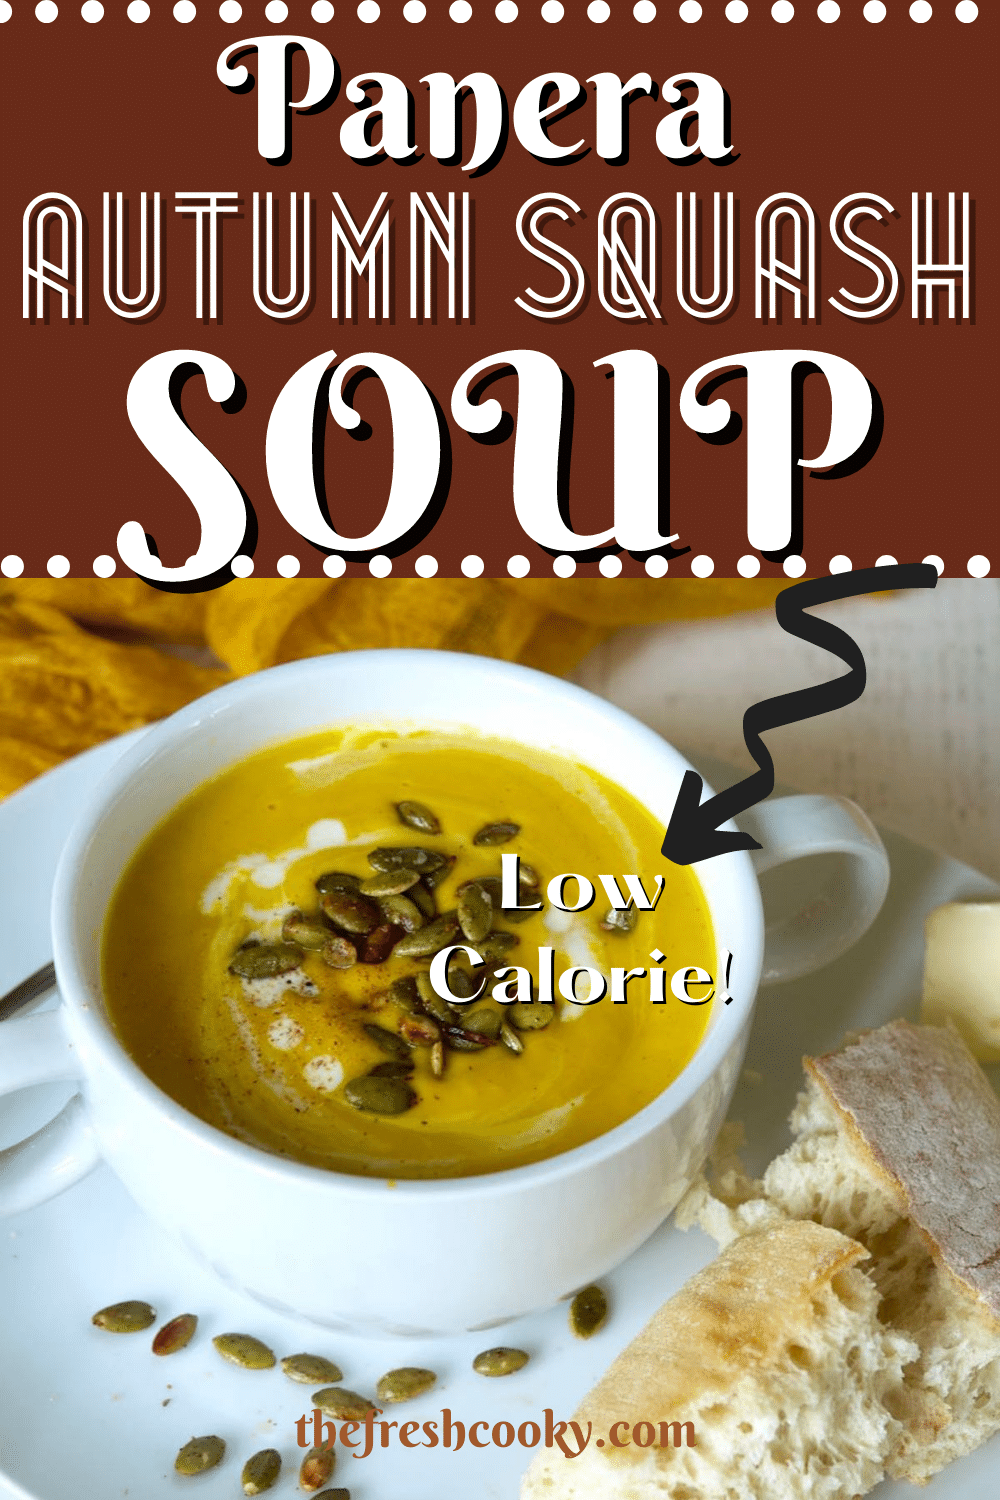 Pin for Panera Autumn Squash Soup recipe with image of white two handled bowl filled with bright yellow creamy butternut squash soup topped with toasted pepitas and a little cream.